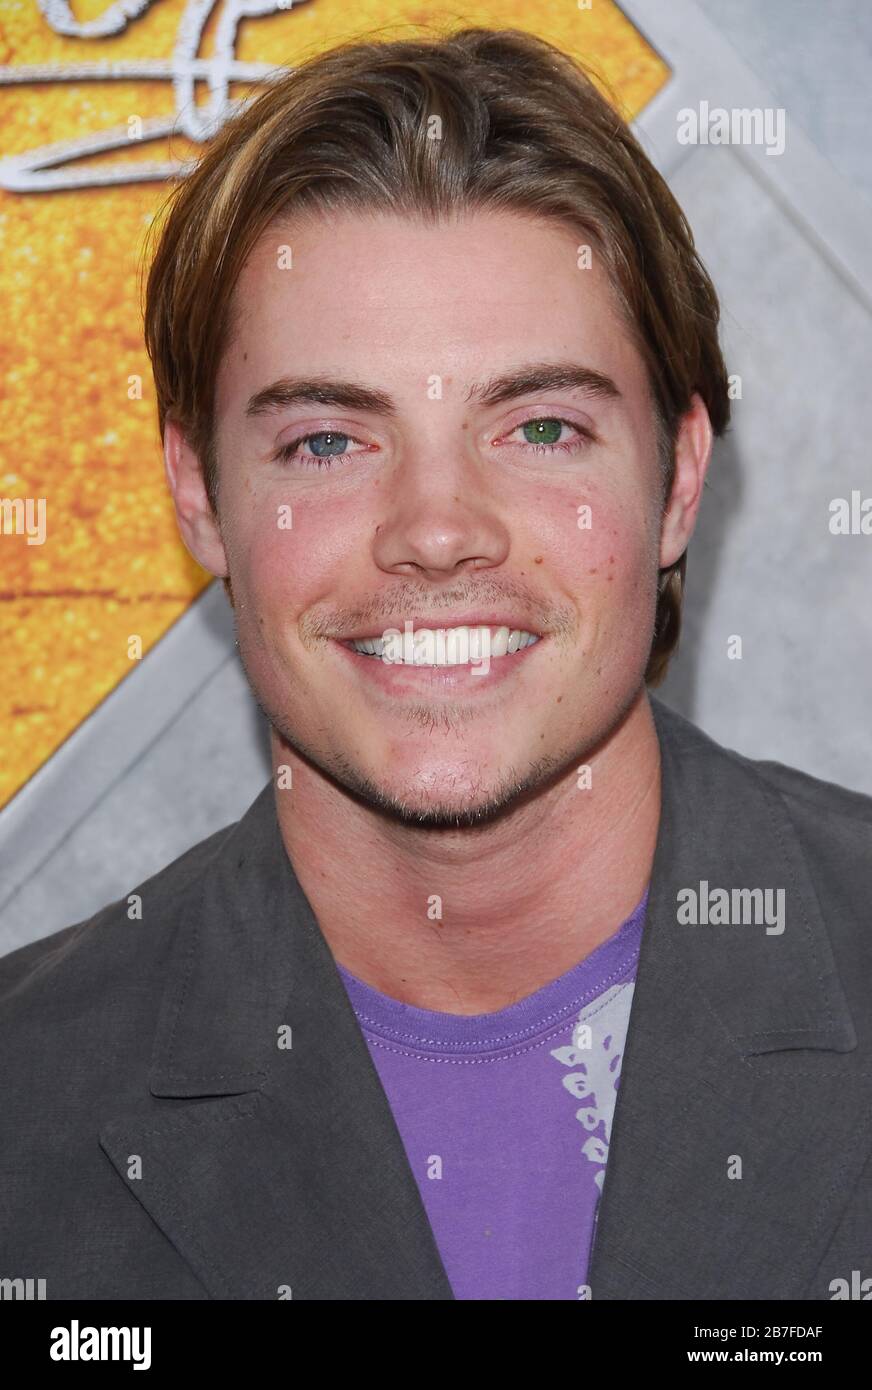 Josh Henderson at the World Premiere of "Step Up" held at the Arclight  Cinemas in Hollywood, CA. The event took place on Monday, August 7, 2006.  Photo by: SBM / PictureLux Stock Photo - Alamy